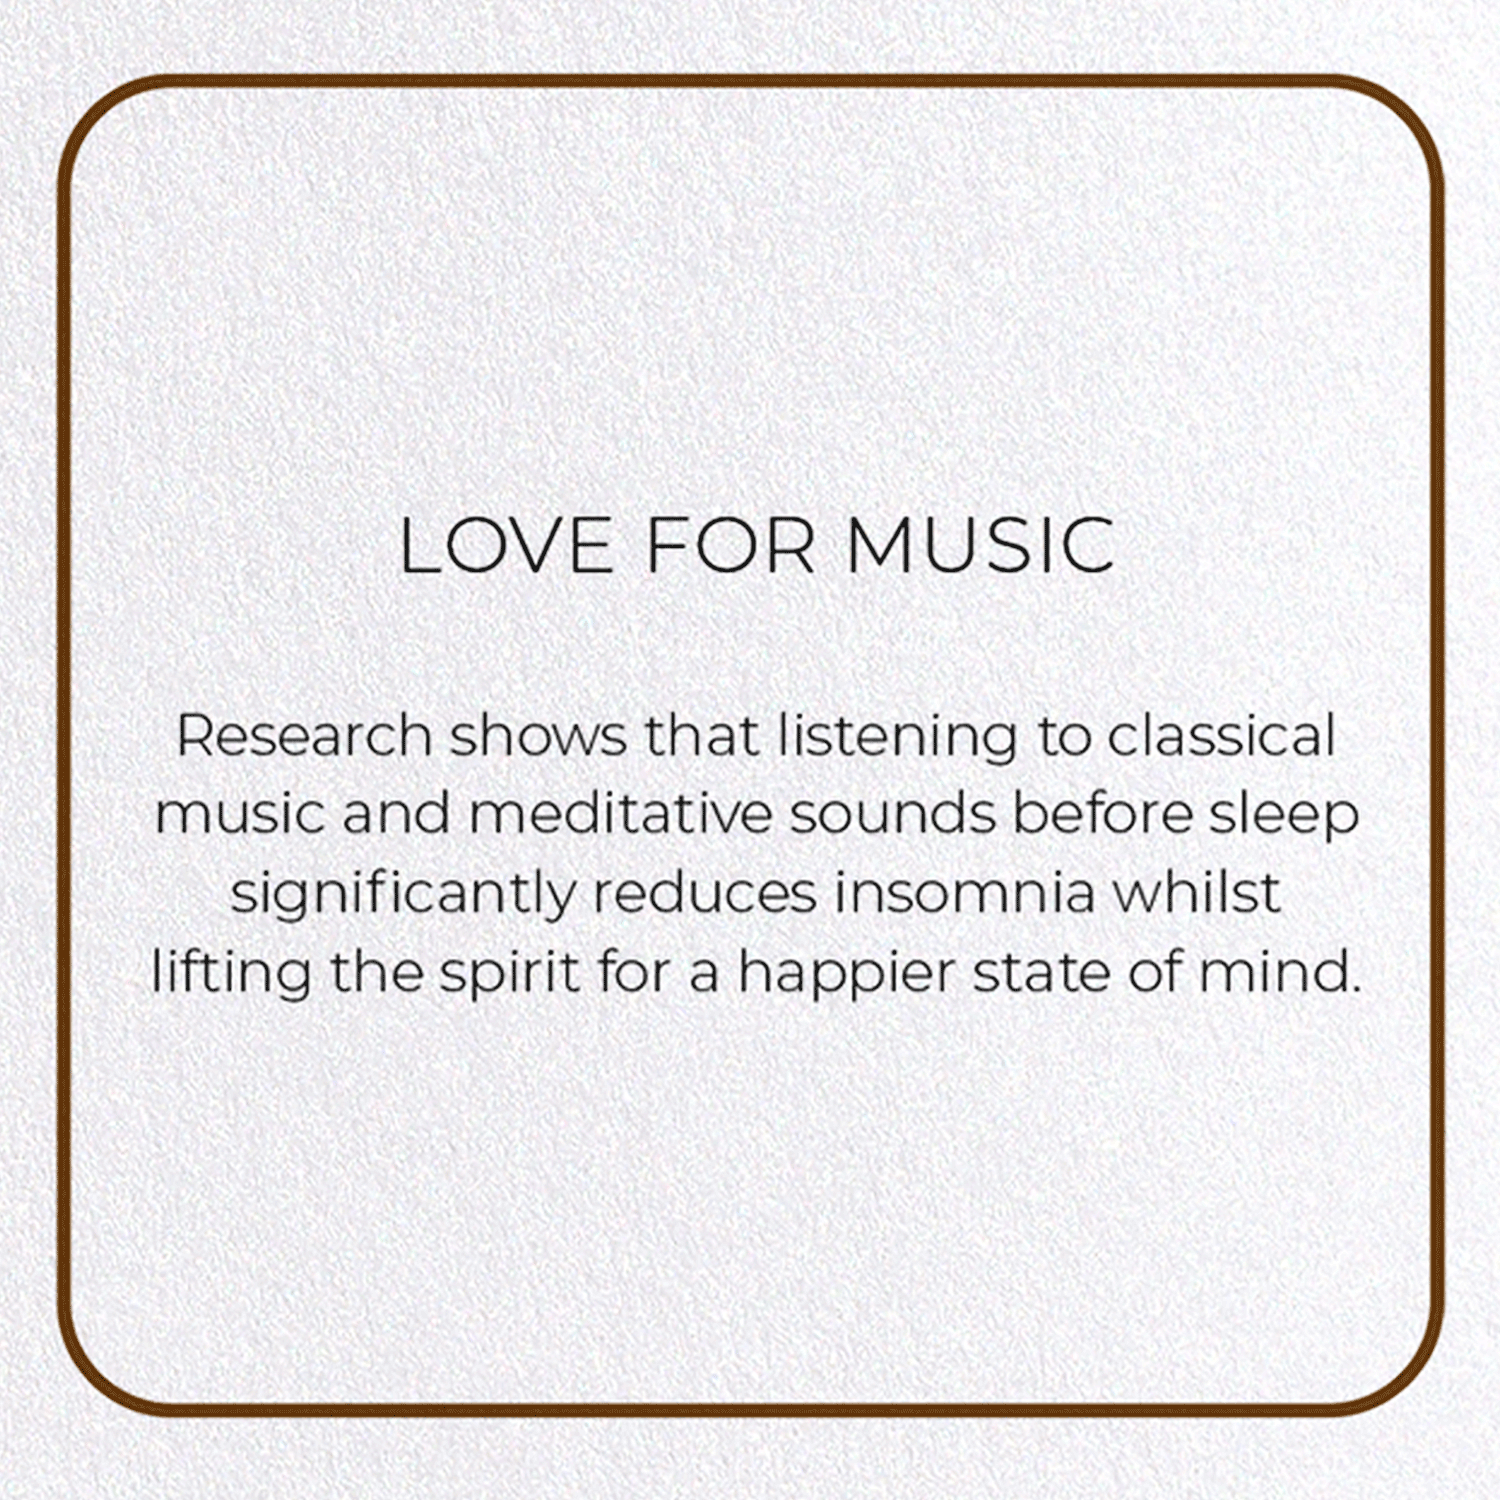 LOVE FOR MUSIC: Photo Greeting Card